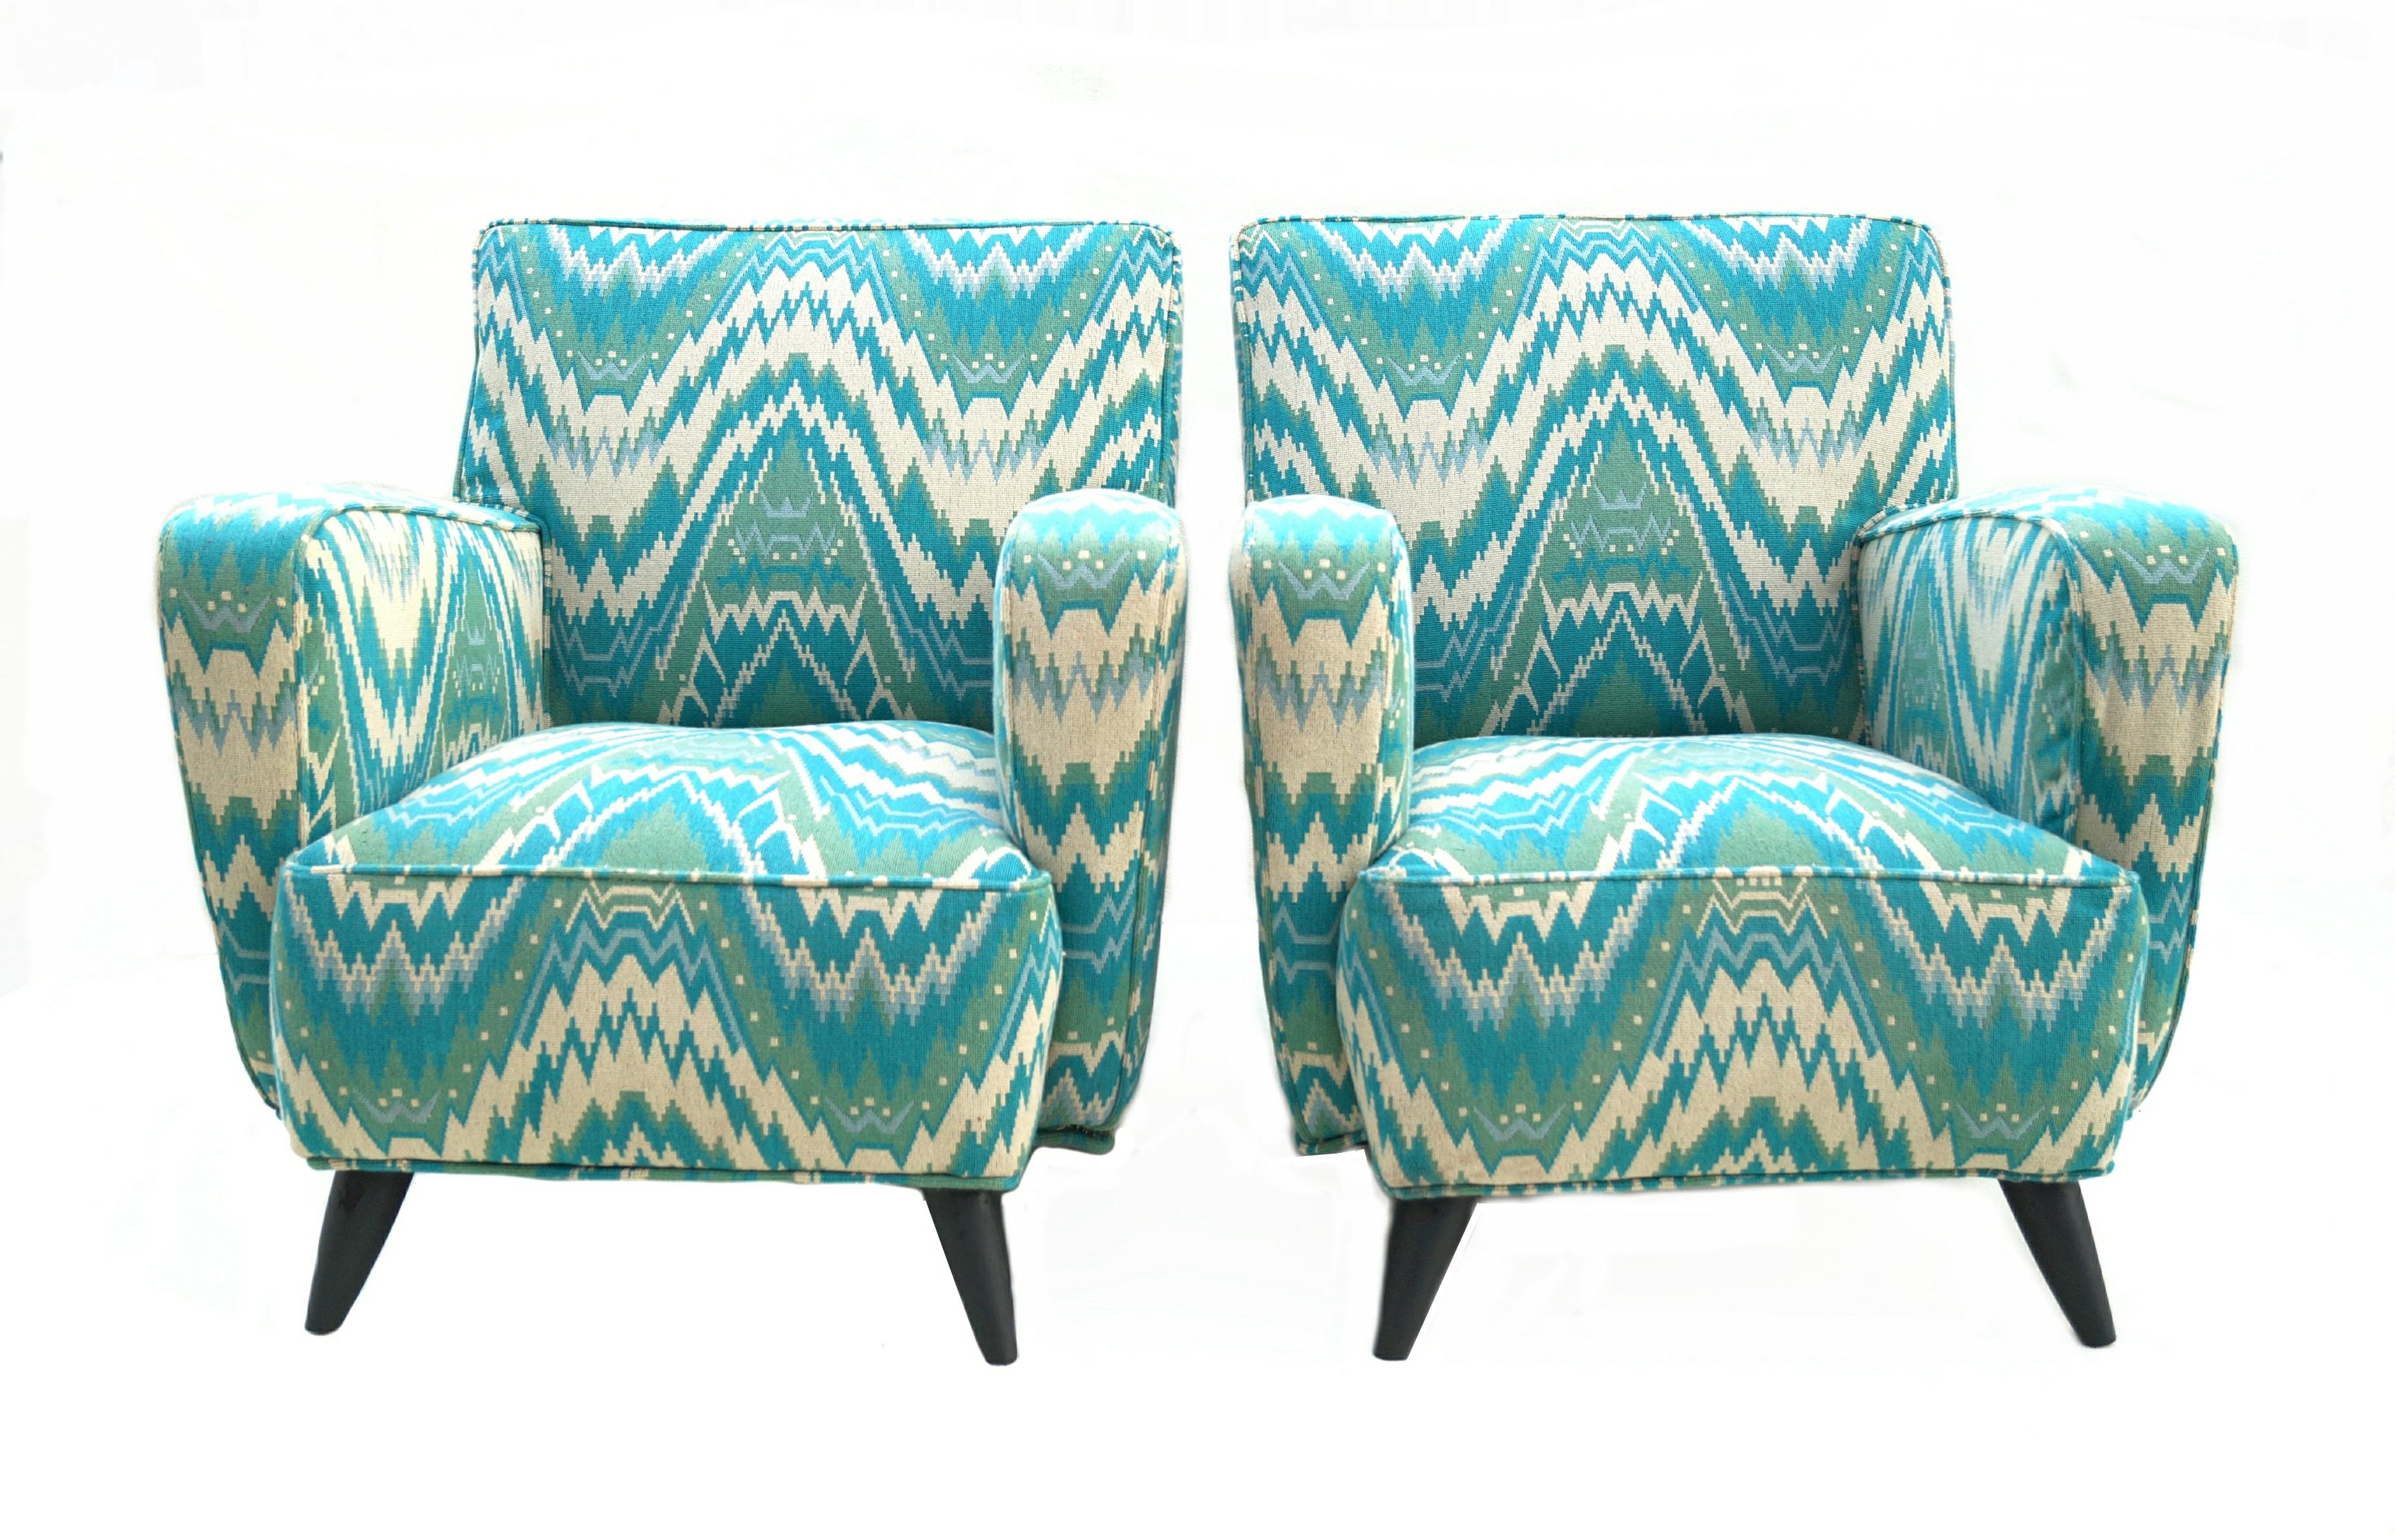 Mid-20th Century Pair of Mid-Century Modern Manner of Adrian Pearsall Sculptural Lounge Chairs For Sale